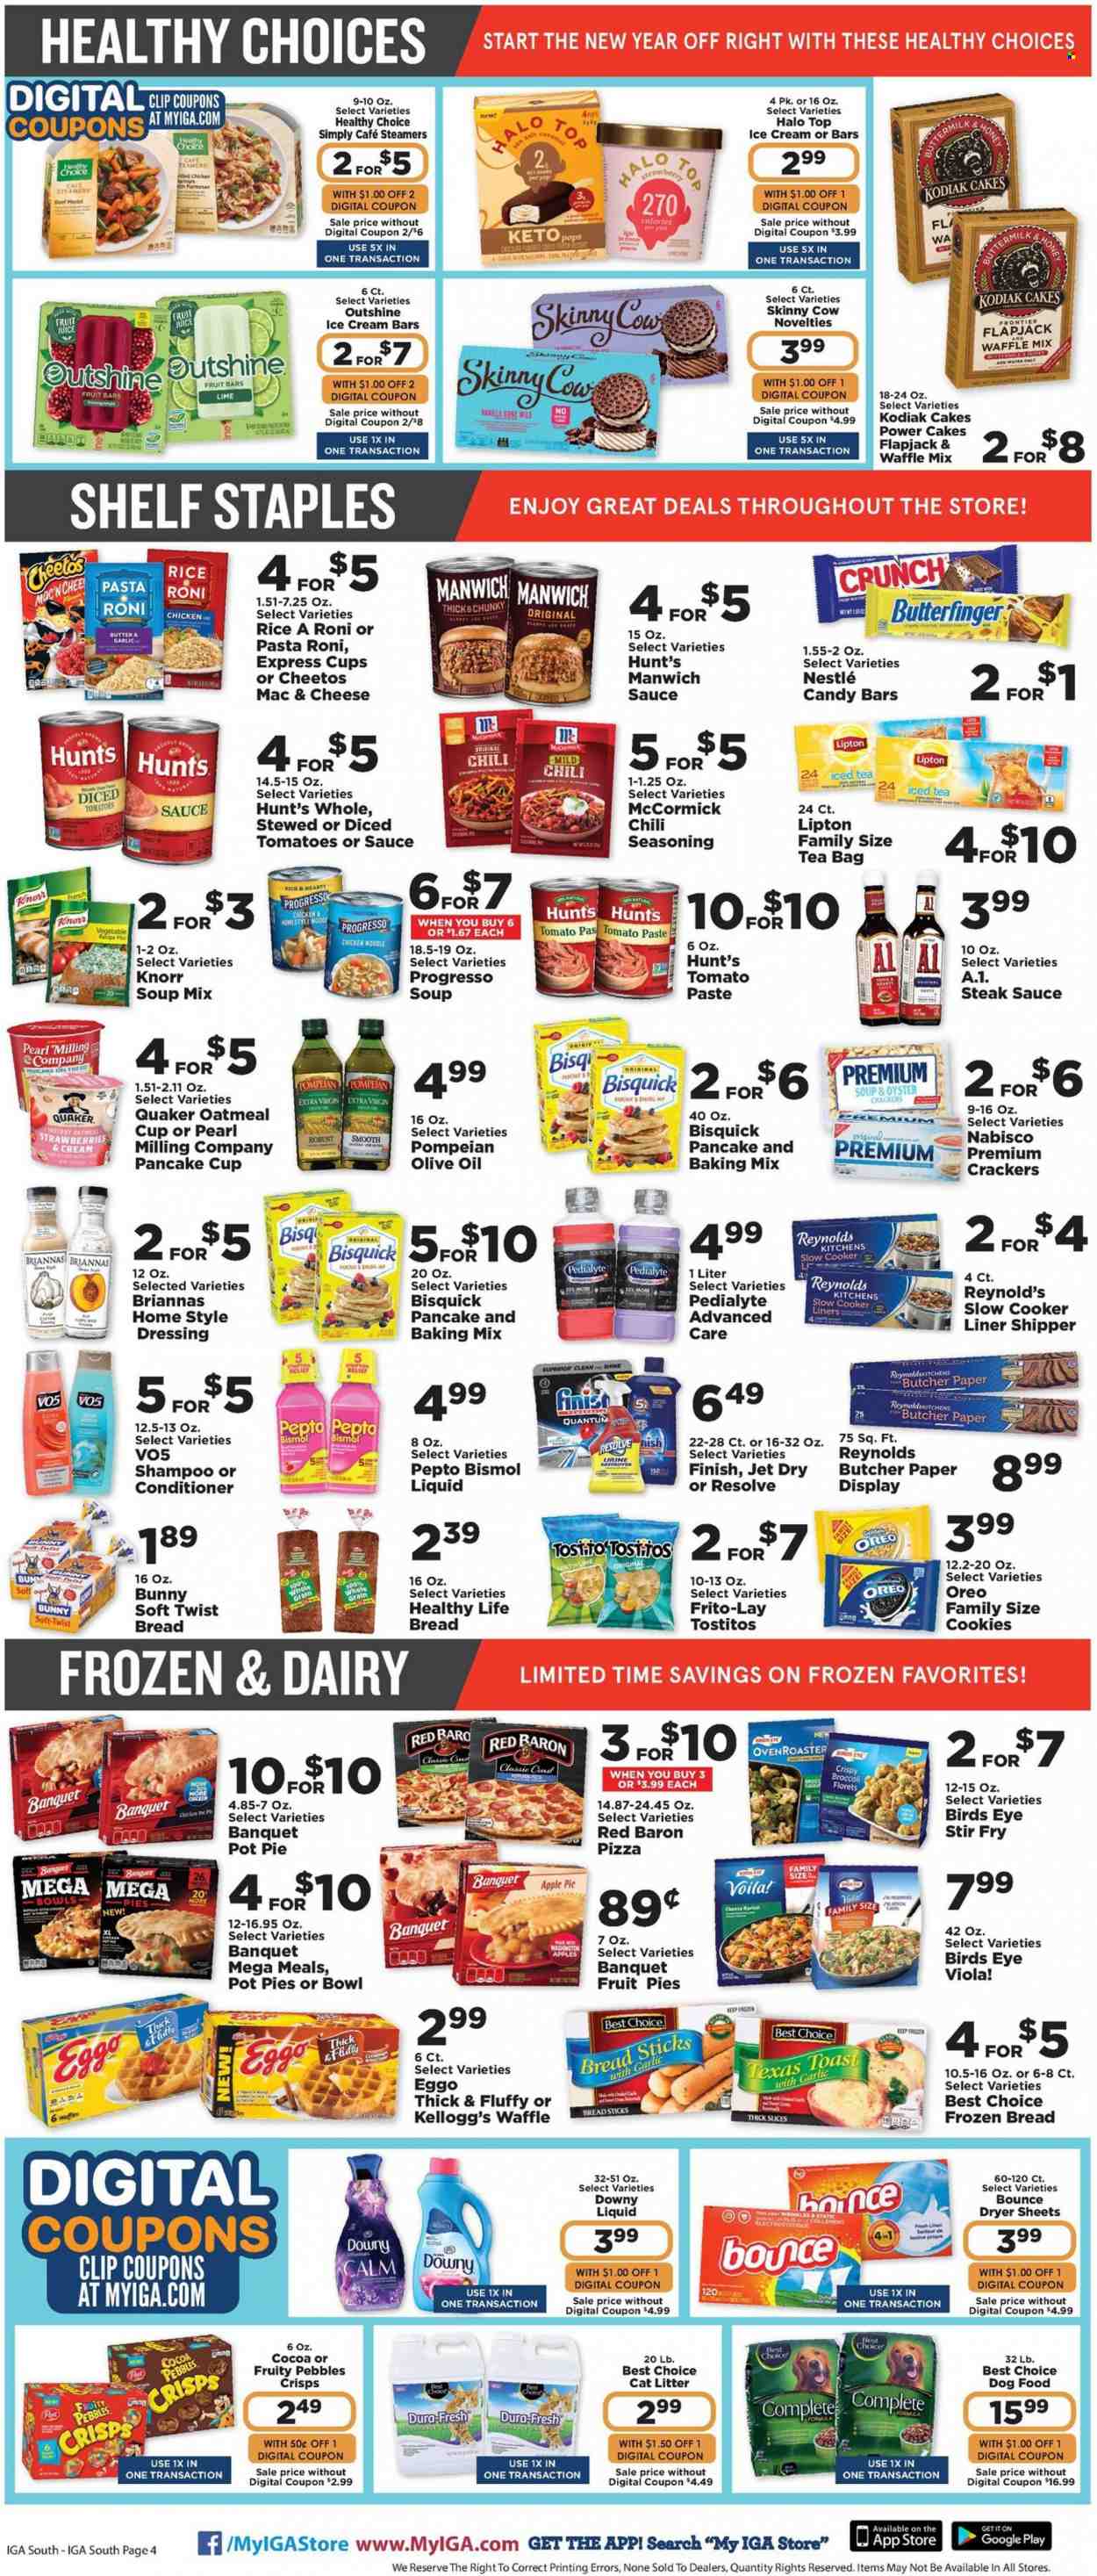 thumbnail - IGA Flyer - 01/05/2022 - 01/11/2022 - Sales products - cake, apple pie, pot pie, broccoli, oysters, pizza, soup mix, Knorr, Bird's Eye, Quaker, Progresso, Healthy Choice, parmesan, Oreo, butter, ice cream, ice cream bars, Red Baron, cookies, Nestlé, crackers, Kellogg's, bread sticks, Cheetos, Frito-Lay, Tostitos, Bisquick, oatmeal, oyster crackers, tomato paste, Manwich, Fruity Pebbles, spice, steak sauce, dressing, extra virgin olive oil, olive oil, oil, honey, juice, fruit juice, Lipton, ice tea, tea bags, Merlot, steak, Bounce, dryer sheets, Downy Laundry, Jet, shampoo, conditioner, VO5, cup, bowl, paper, linens, cat litter, animal food, dog food. Page 4.